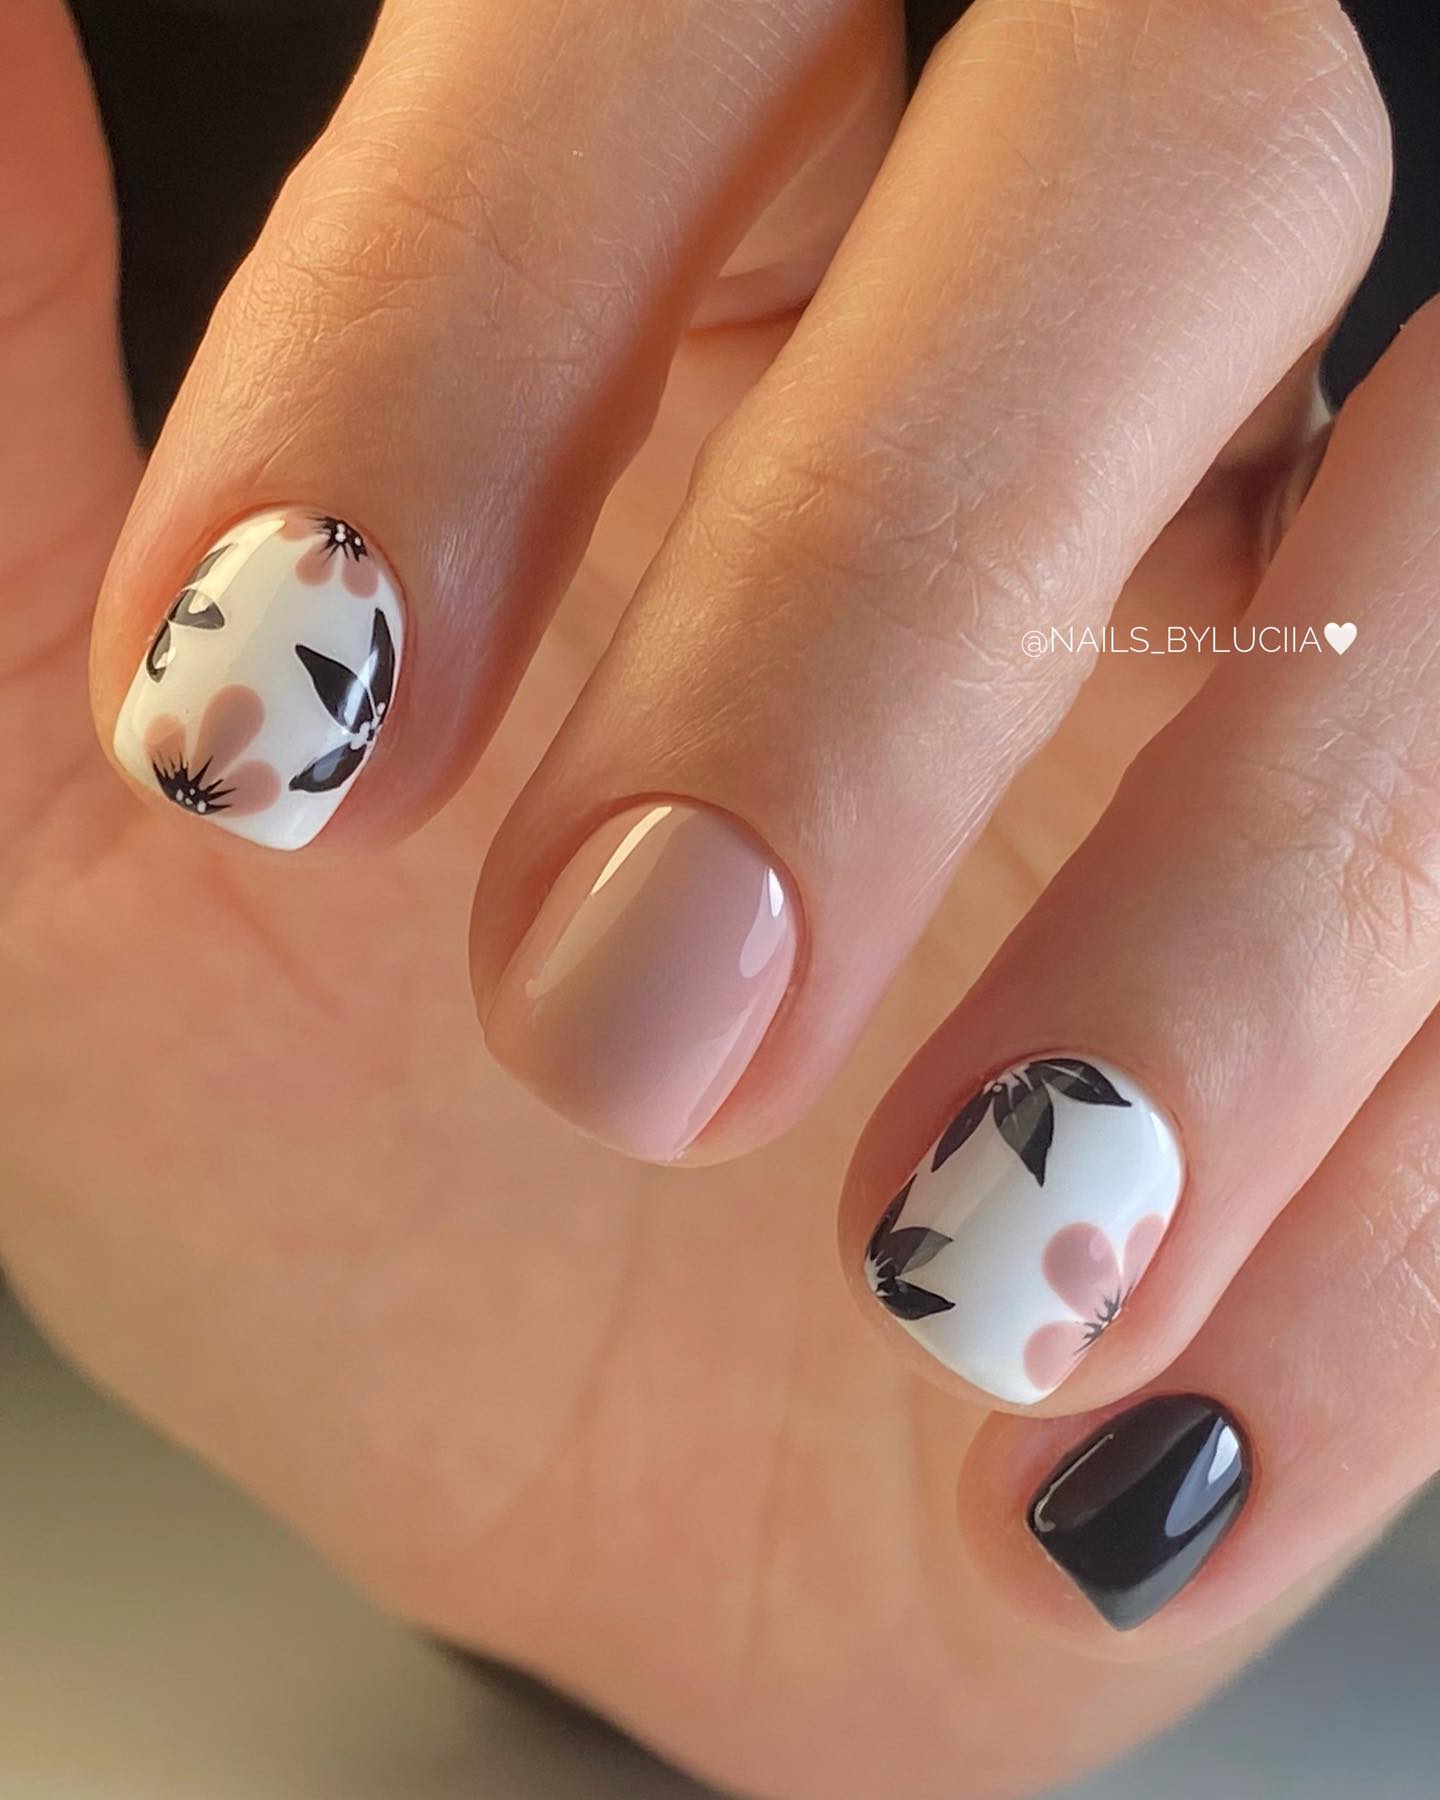 100+ Short Nail Designs You’ll Want To Try This Year images 10